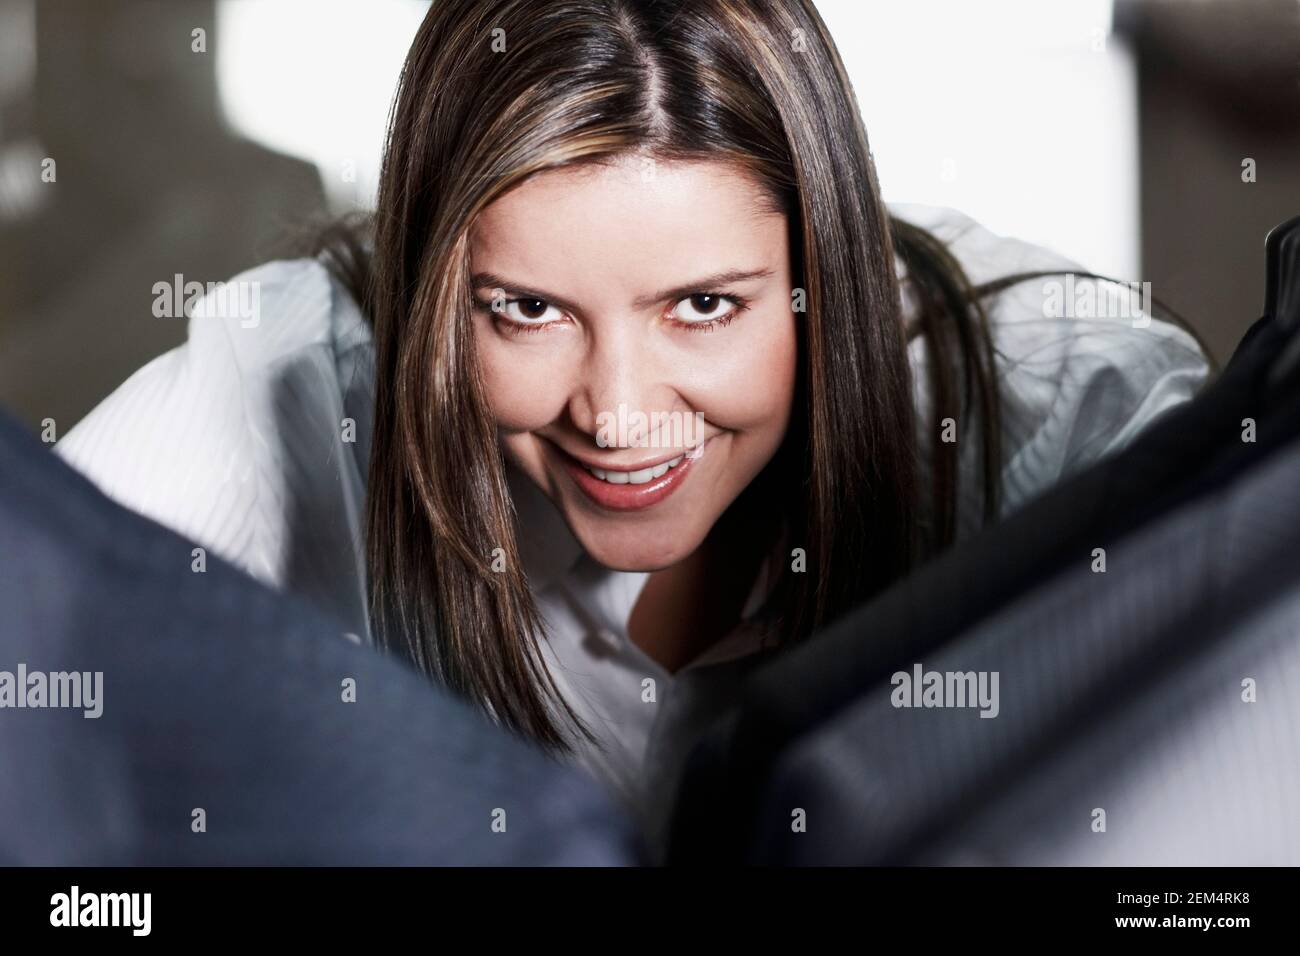 Close-up of a young woman looking at jackets Stock Photo